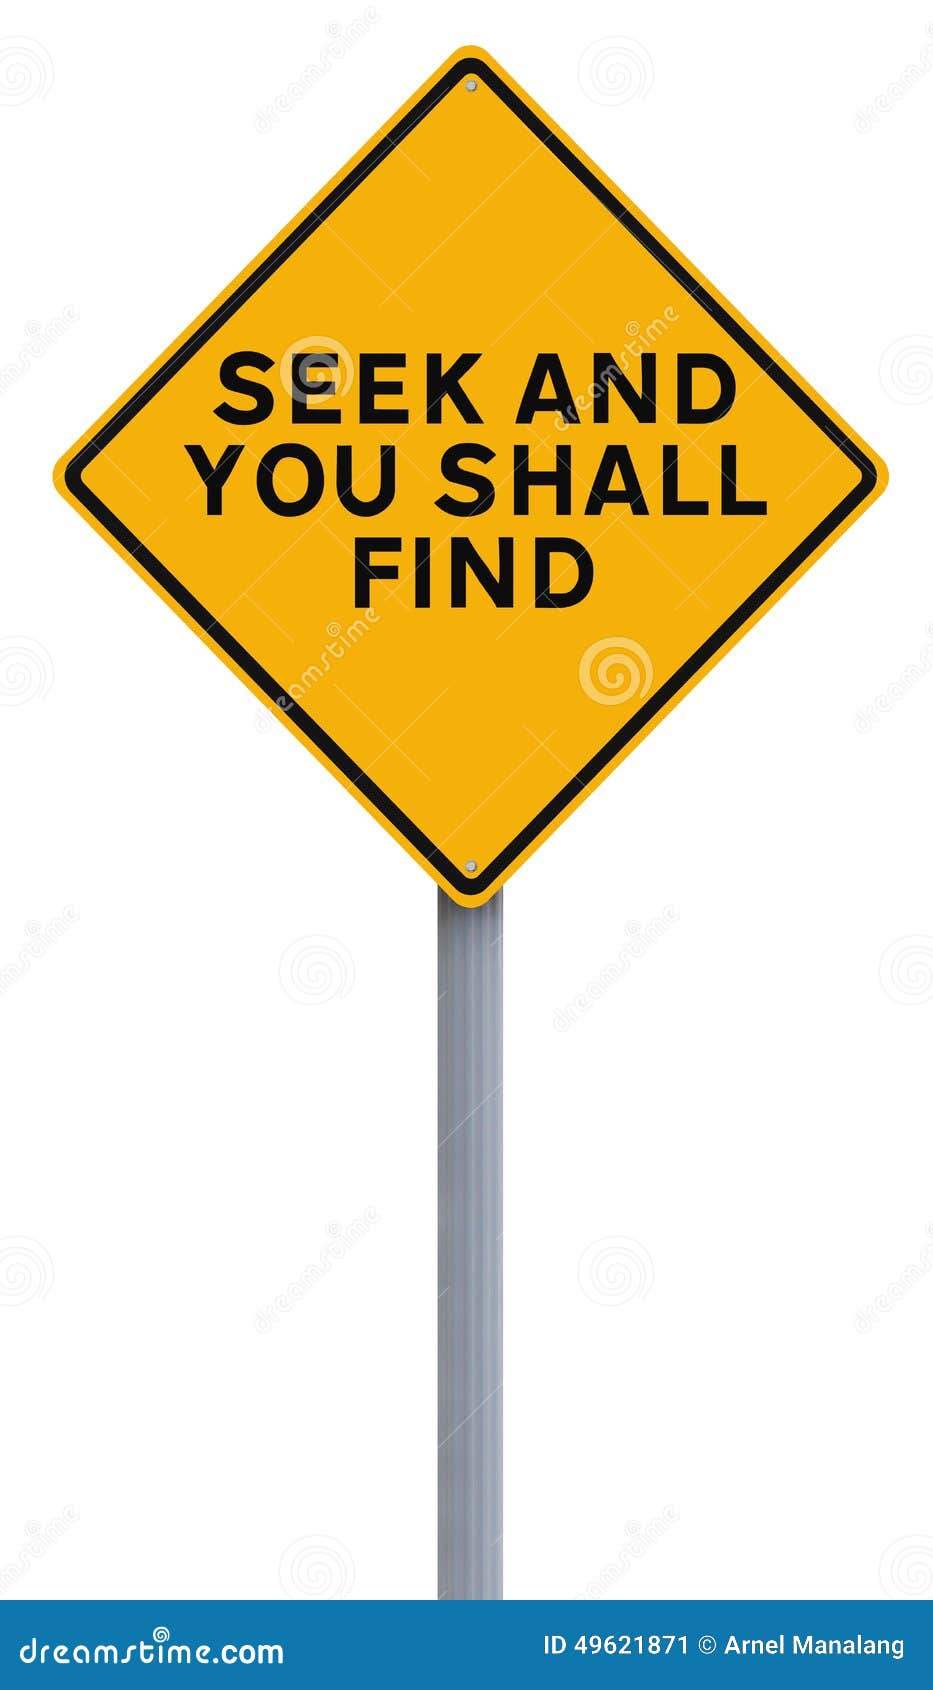 https://thumbs.dreamstime.com/z/seek-you-shall-find-modified-road-sign-indicating-religious-quote-49621871.jpg